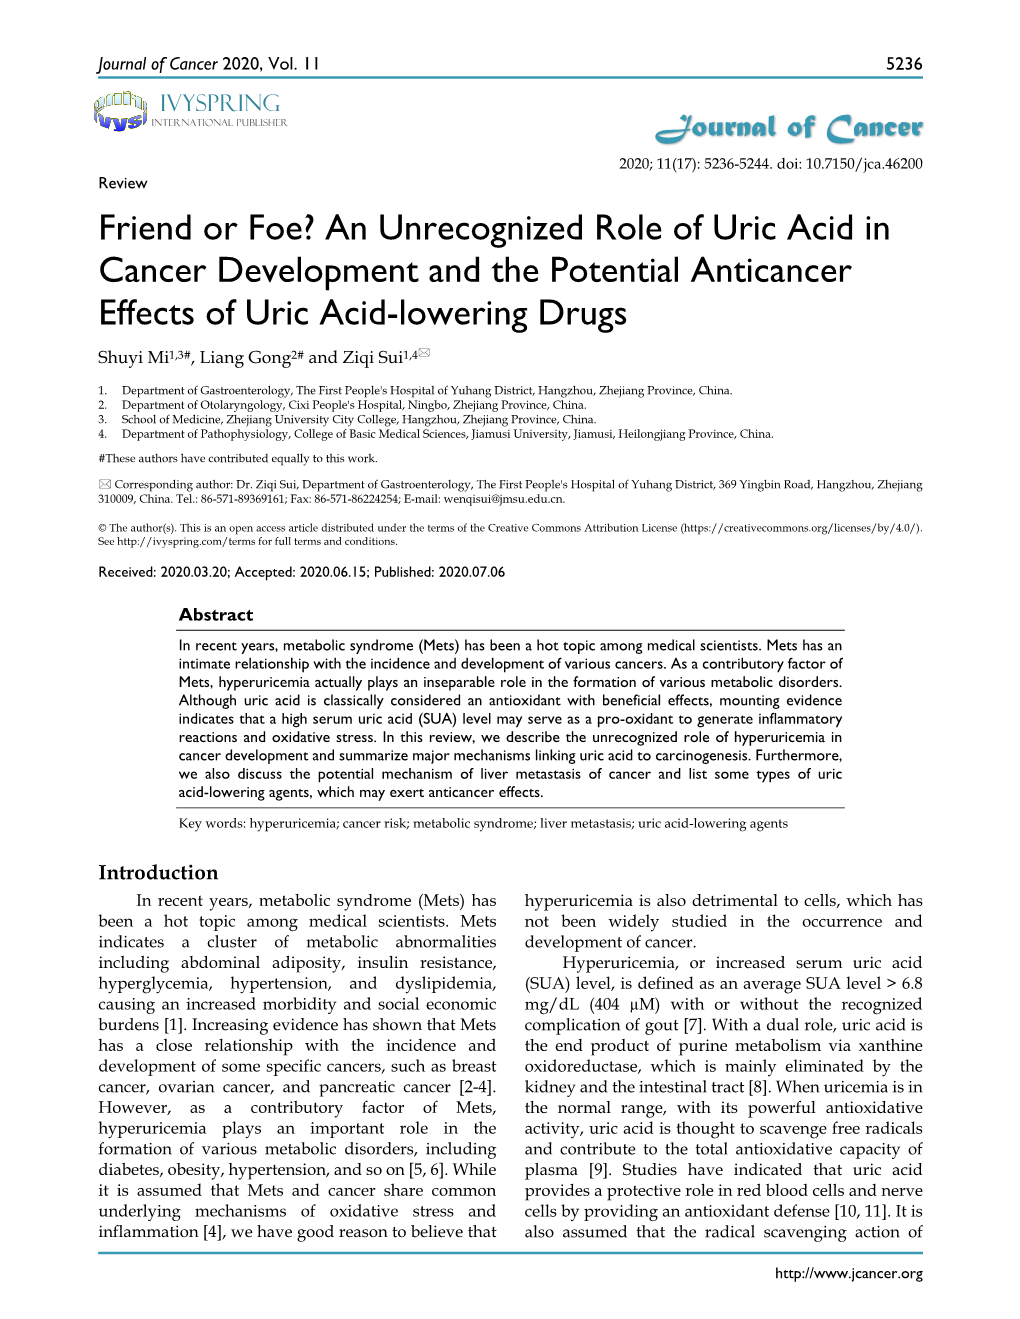 An Unrecognized Role of Uric Acid in Cancer Development and the Potential Anticancer Effects of Uric Acid-Lowering Drugs Shuyi Mi1,3#, Liang Gong2# and Ziqi Sui1,4